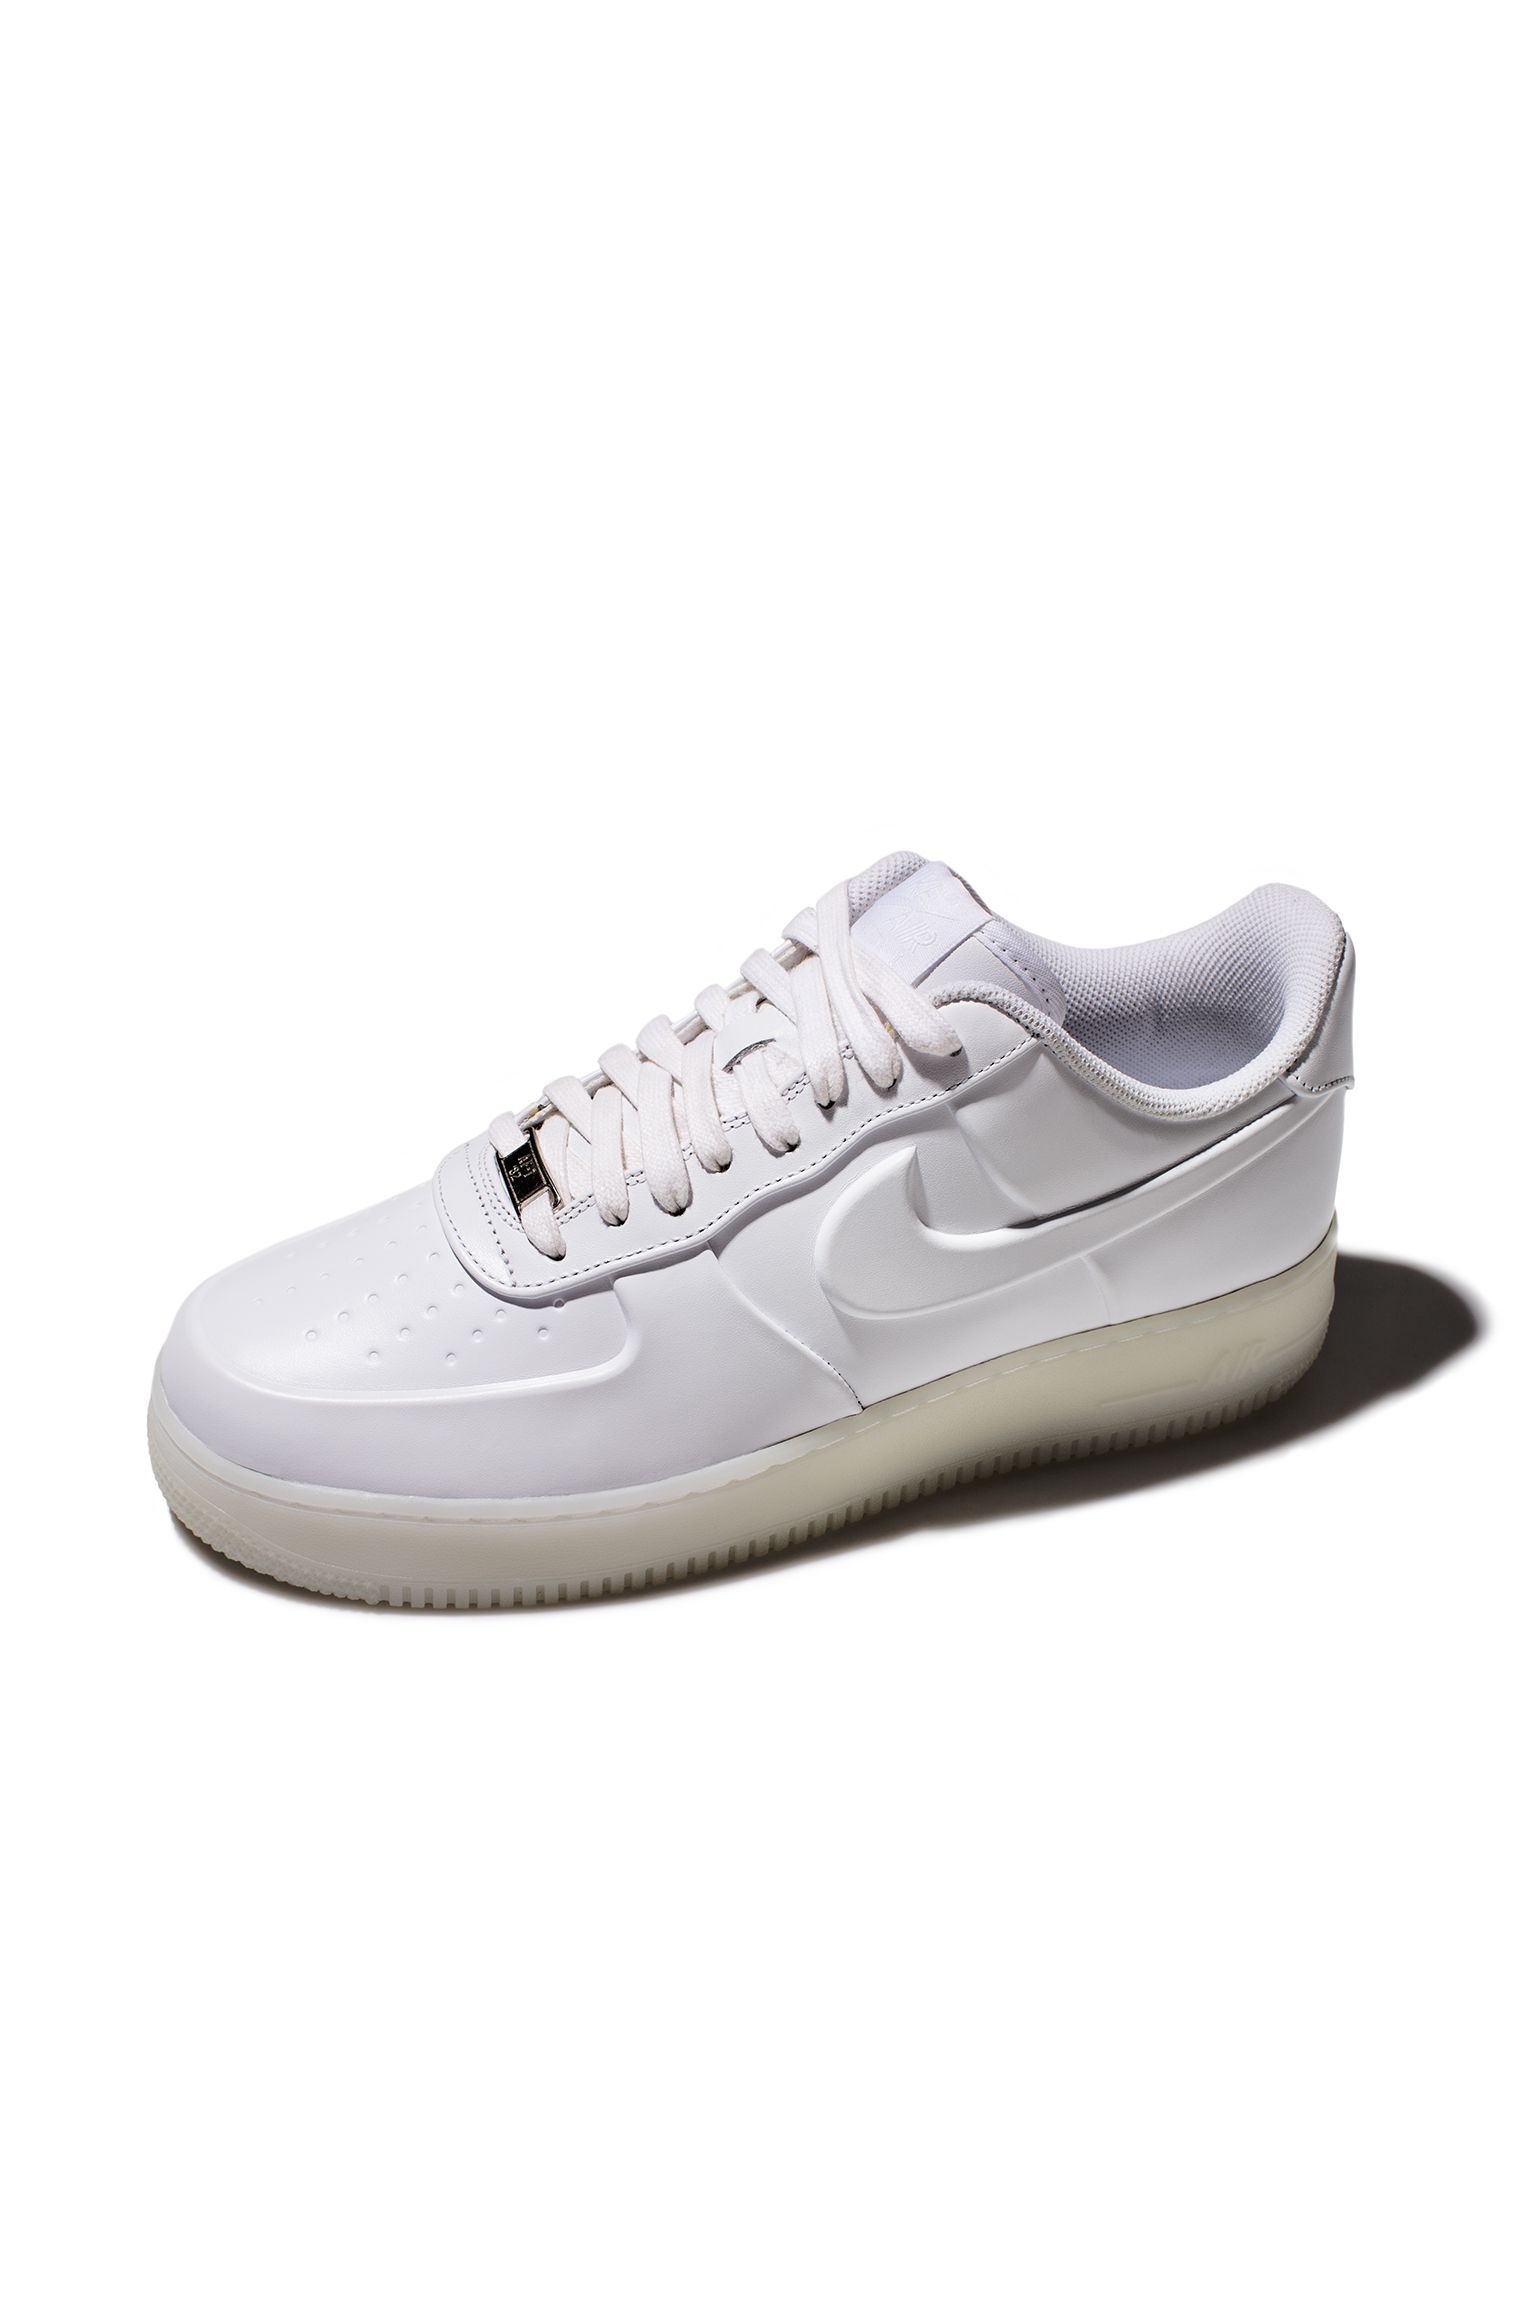 nike white shoes air force 1